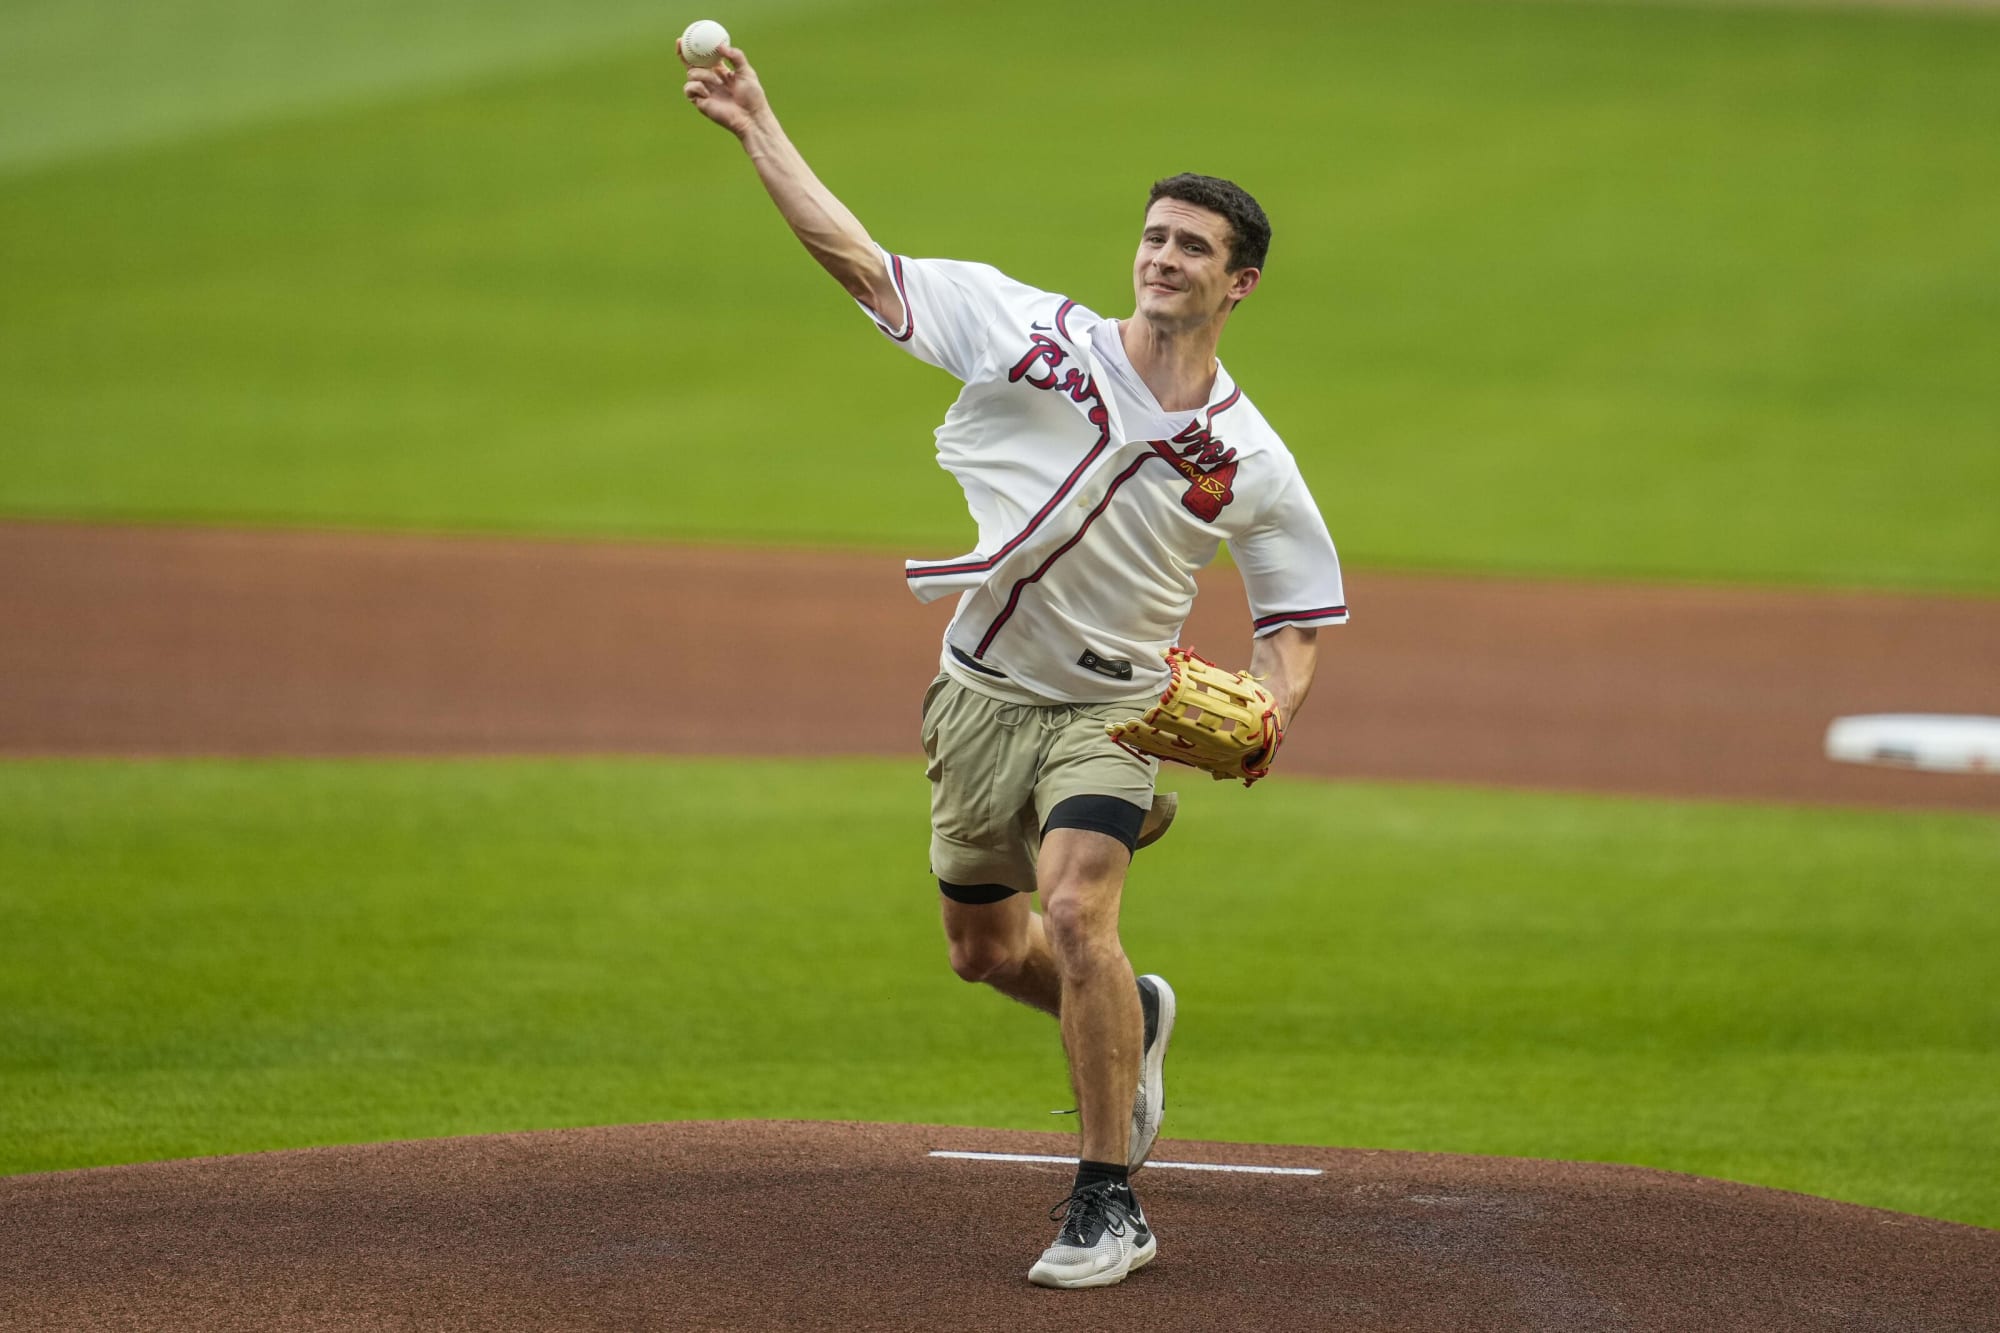 Stetson Bennett’s first pitch at Braves game settles arm strength questions